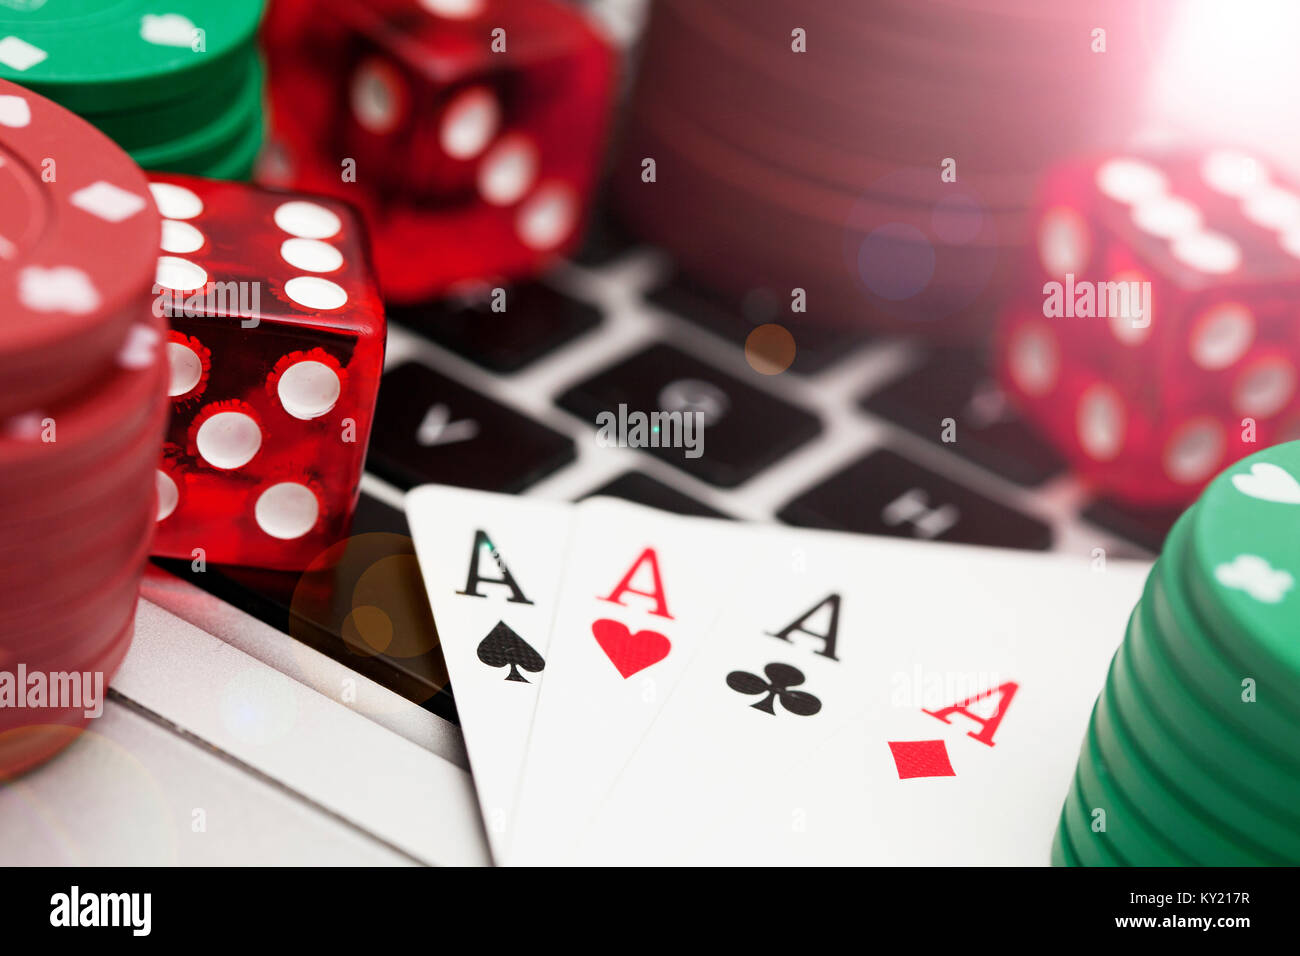 Online gambling. Playing cards, dice and betting chips on a computer keyboard Stock Photo